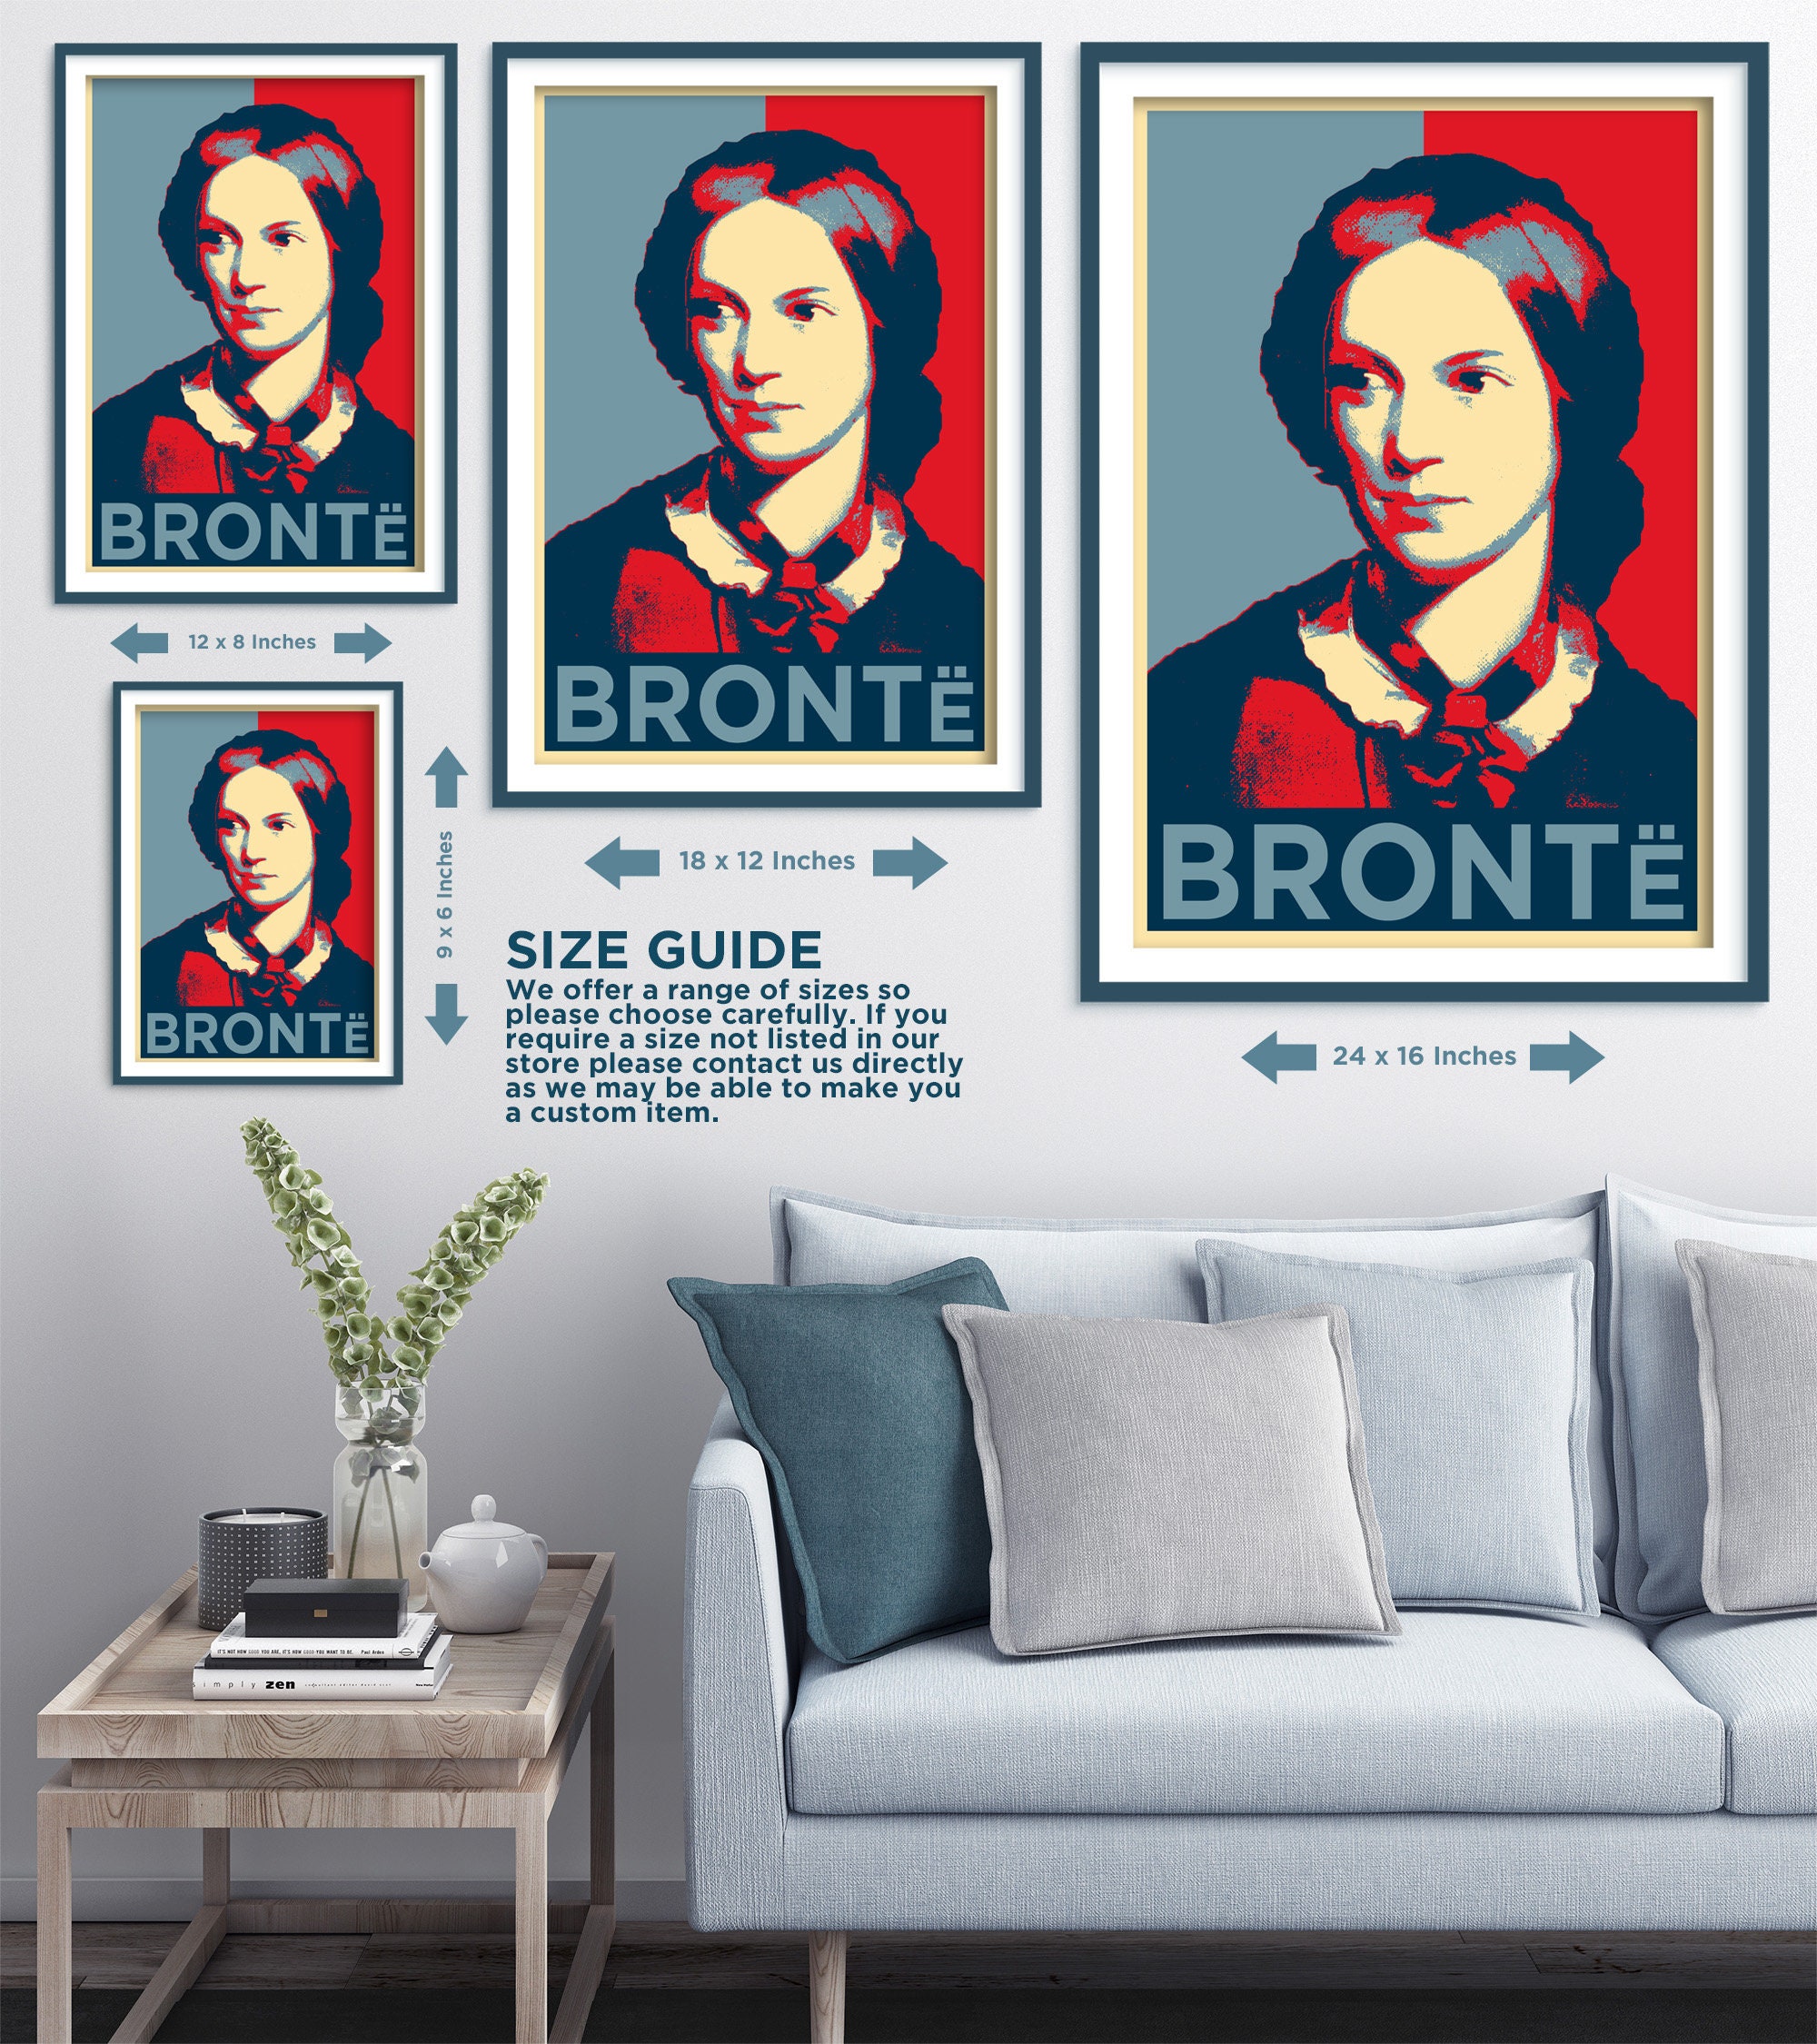 Charlotte Bronte Hope Original Art Print Poster Photo Gift Wall Decor  Sisters Anne Emily Authors 